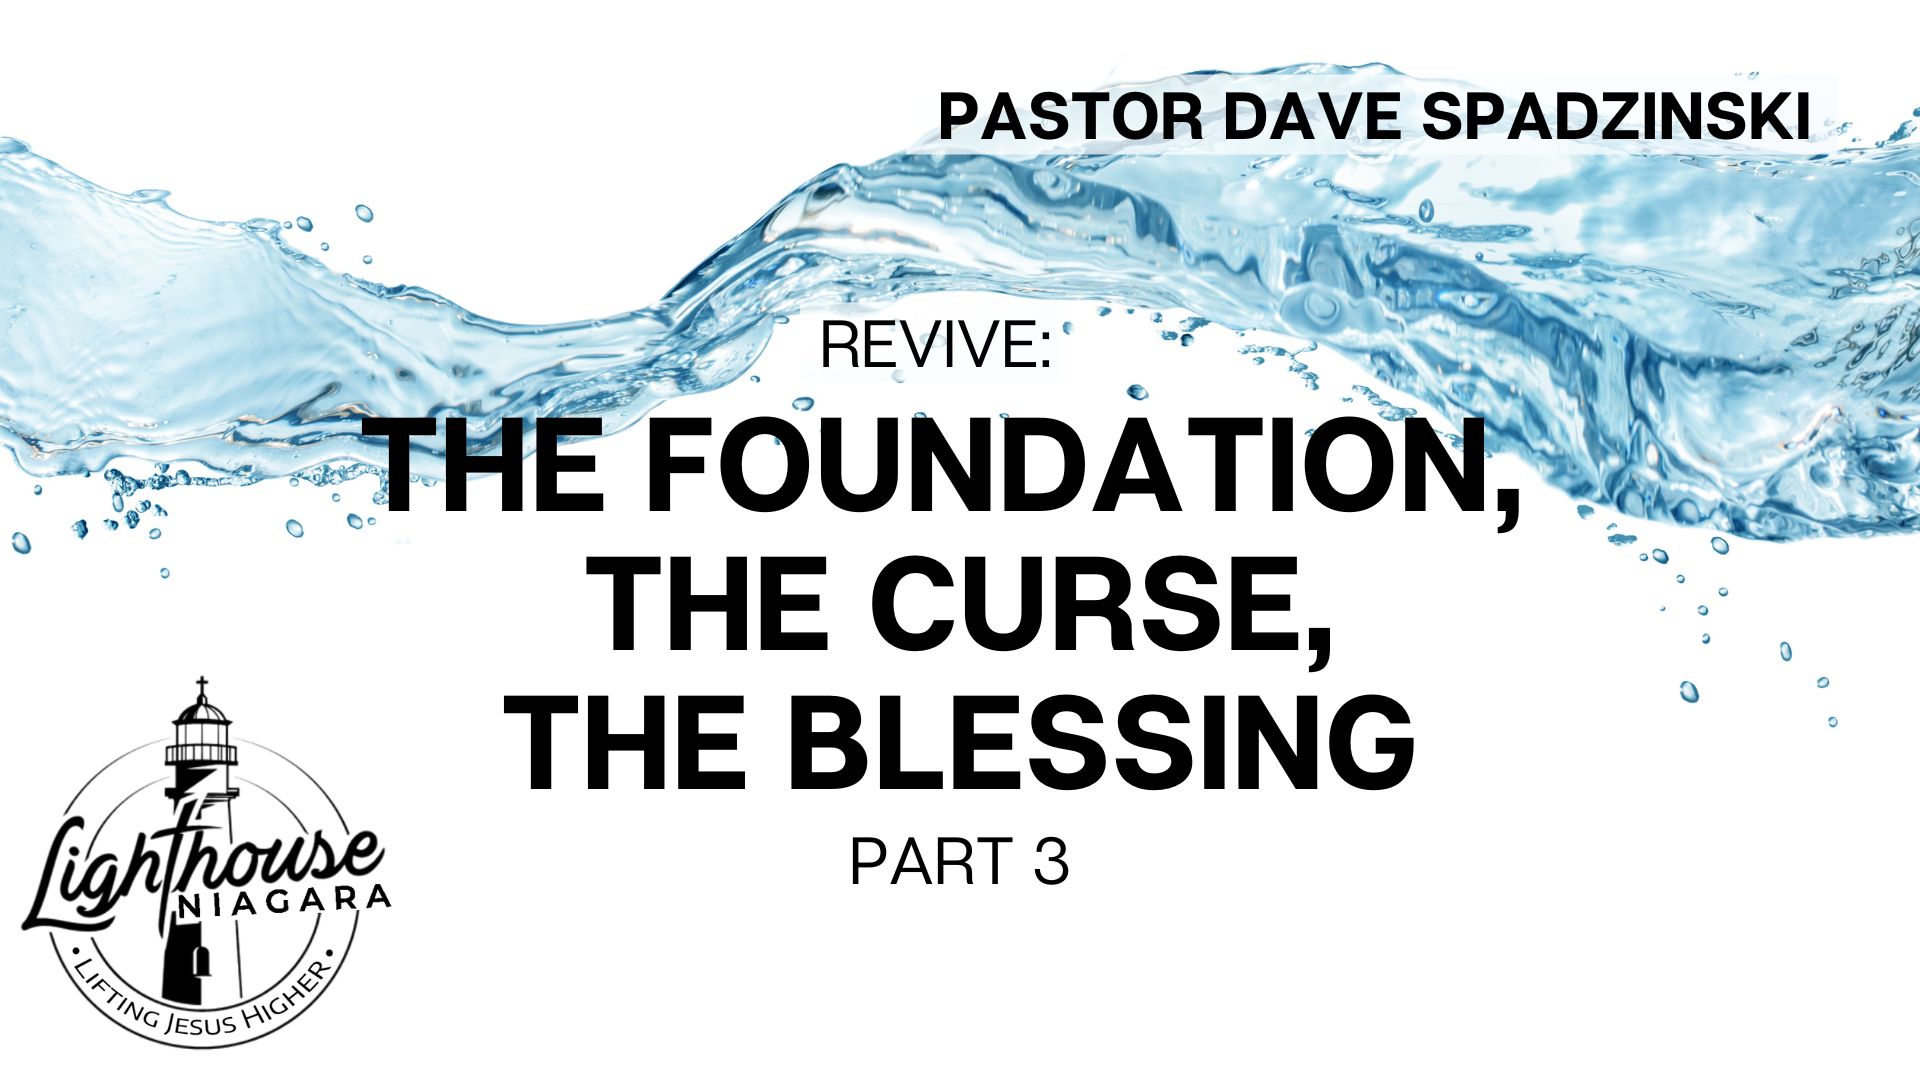 Revive: The Foundation, The Curse, The Blessing - Pastor Dave Spadzinski